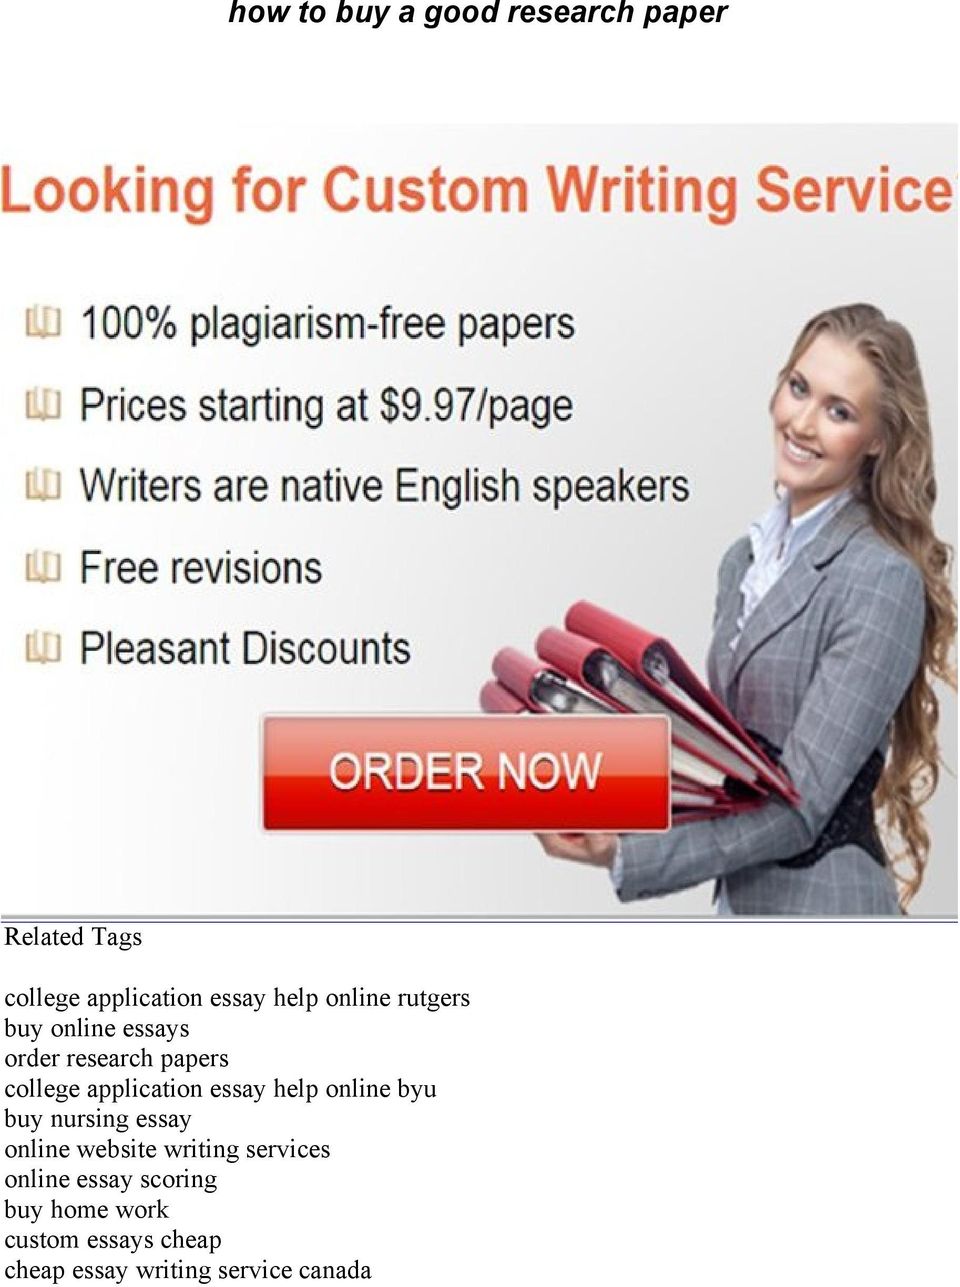 Can You Pass The essay writing service Test?